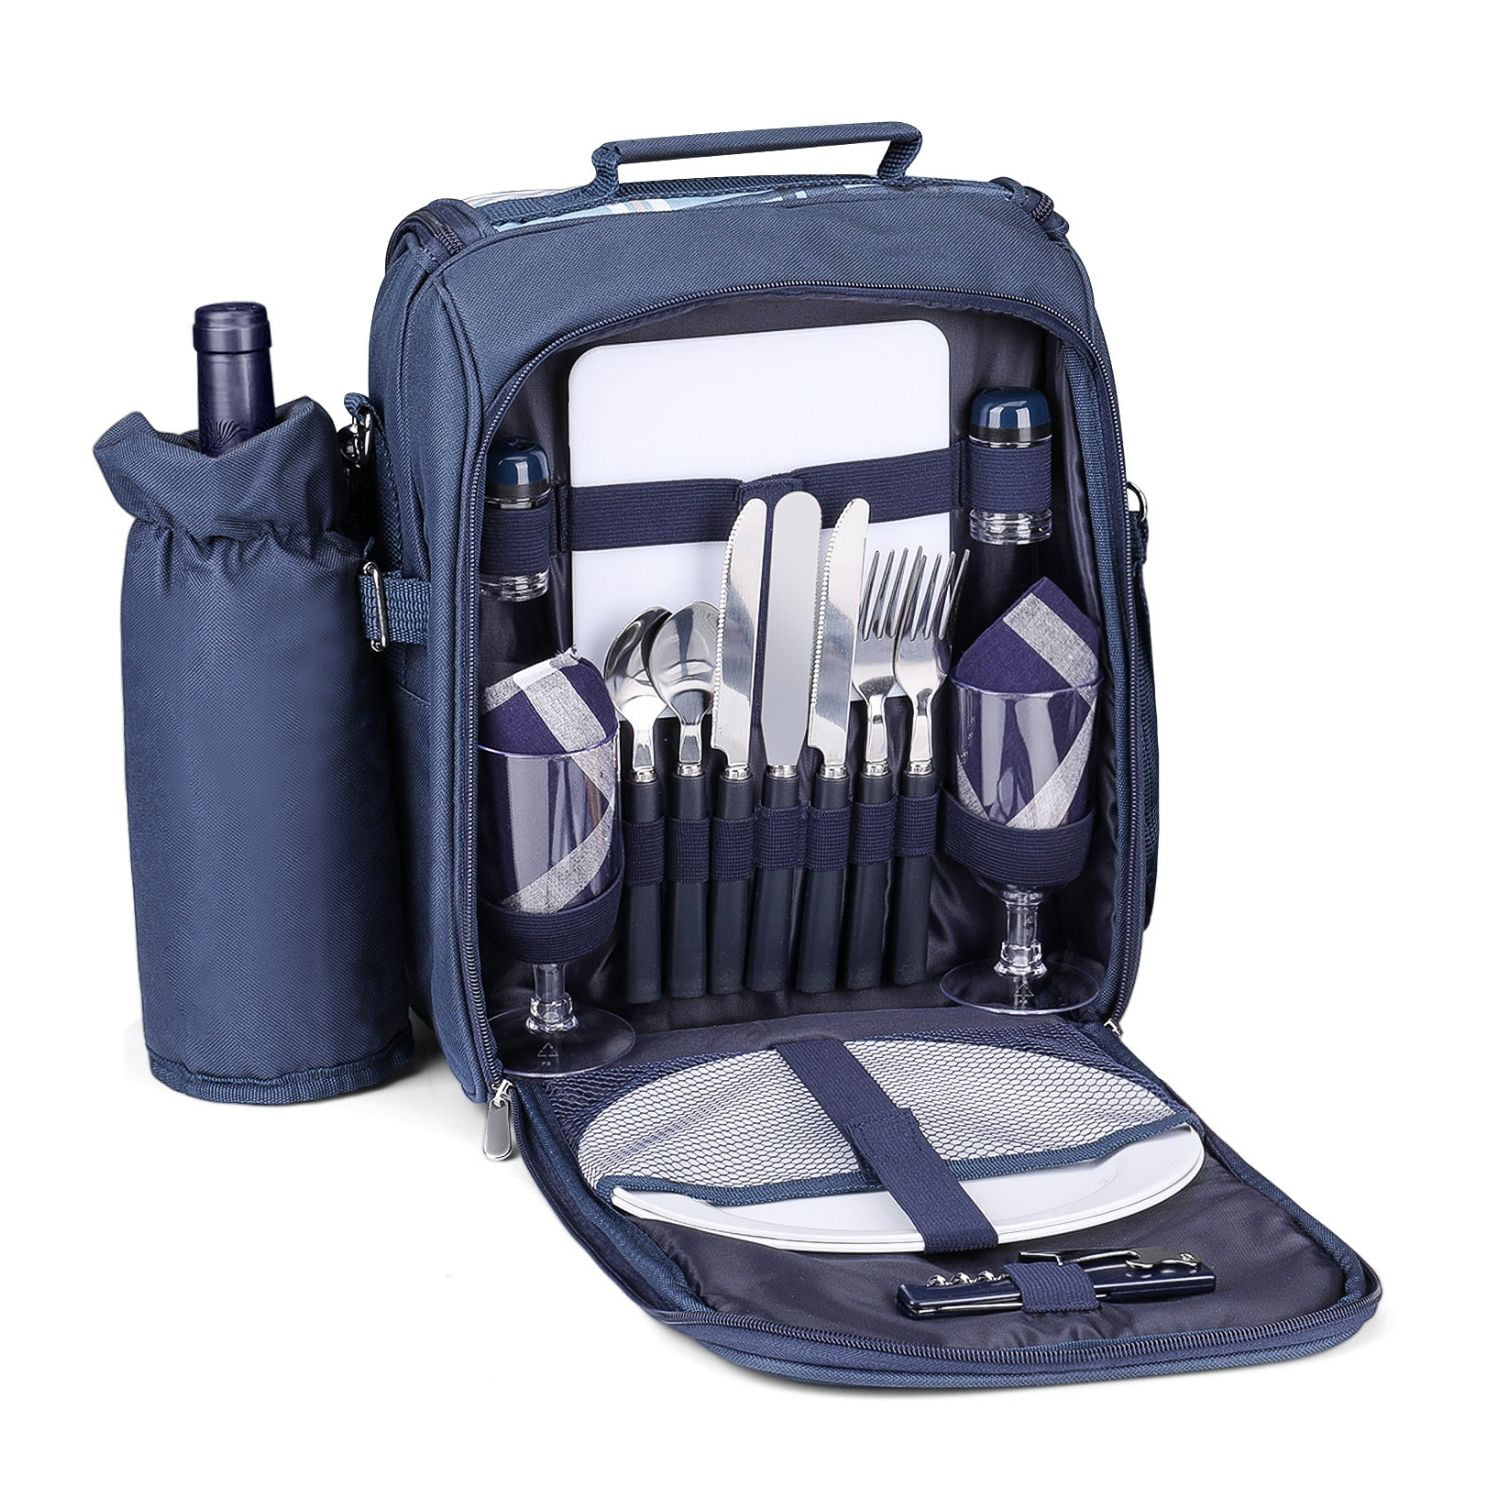  Apollo Walker Picnic Backpack Set for 2 Person with Cooler  Compartment, Detachable Bottle/Wine Holder, Fleece Blanket, Plates and  Cutlery Set (Teal) : Patio, Lawn & Garden